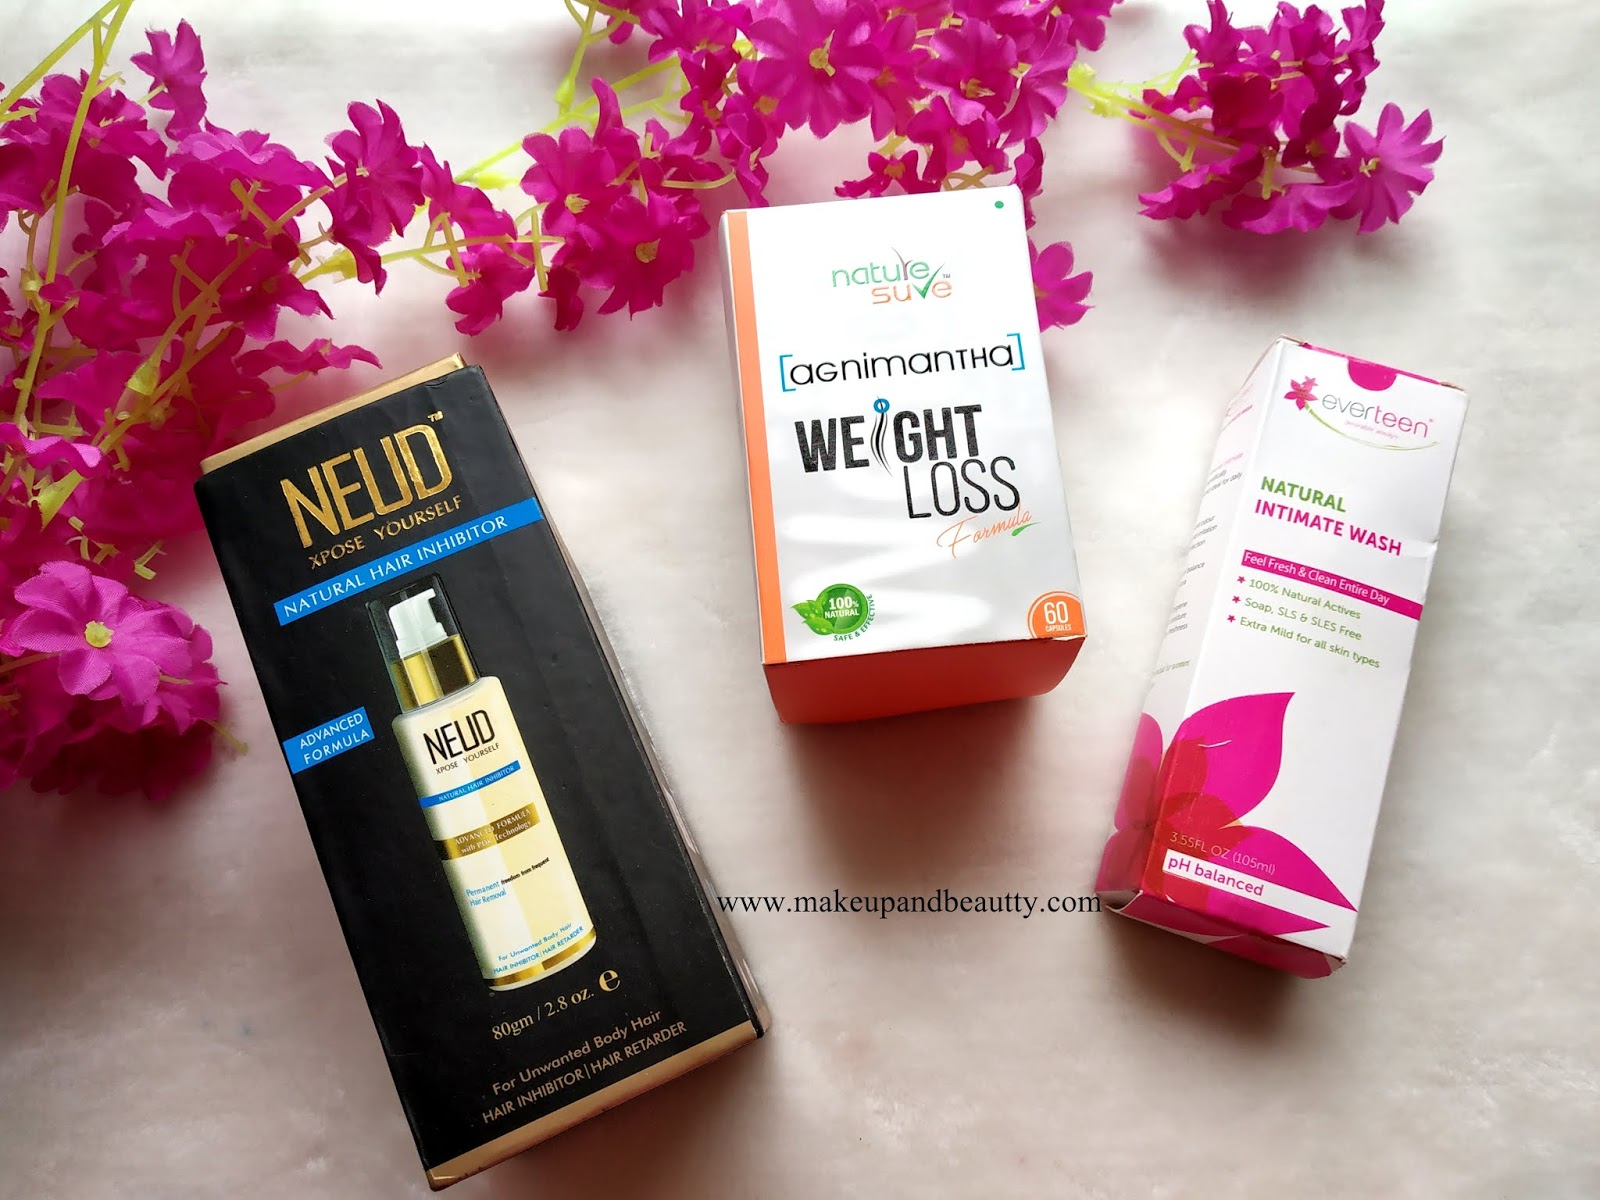 Makeup and beauty !!!: WOMEN PERSONAL CARE & HYGIENE FT. EVERTEEN II NEUD  II NATURE SURE PRODUCTS